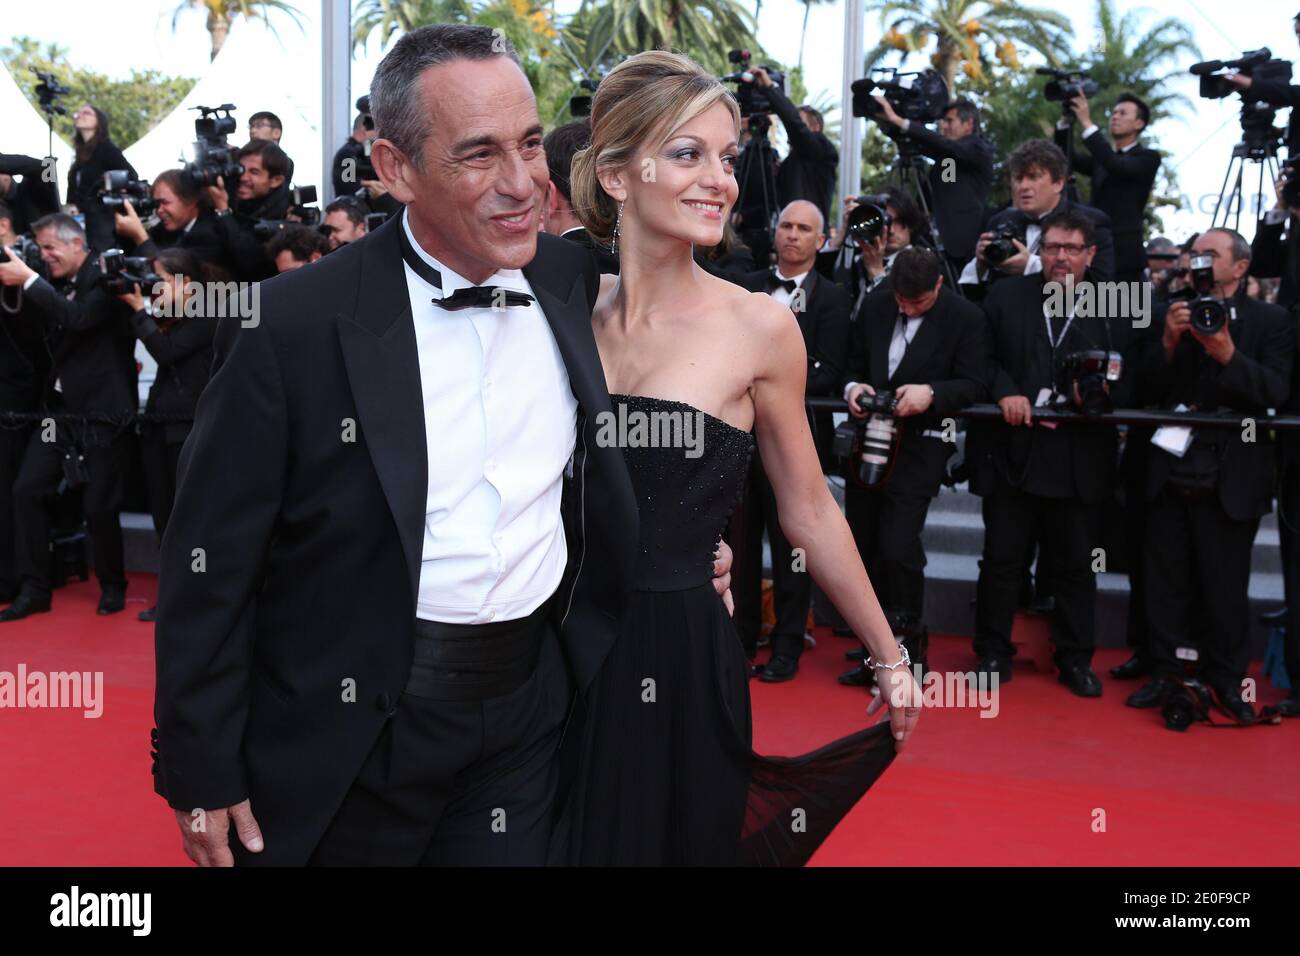 Thierry Ardisson and his girlfriend Audrey Crespo-Mara arriving at the Lawless screening held at the Palais Des Festivals as part of the 65th International Cannes Film Festival in Cannes, France on May 19, 2012. Photo by Frederic Nebinger/ABACAPRESS.COM Stock Photo